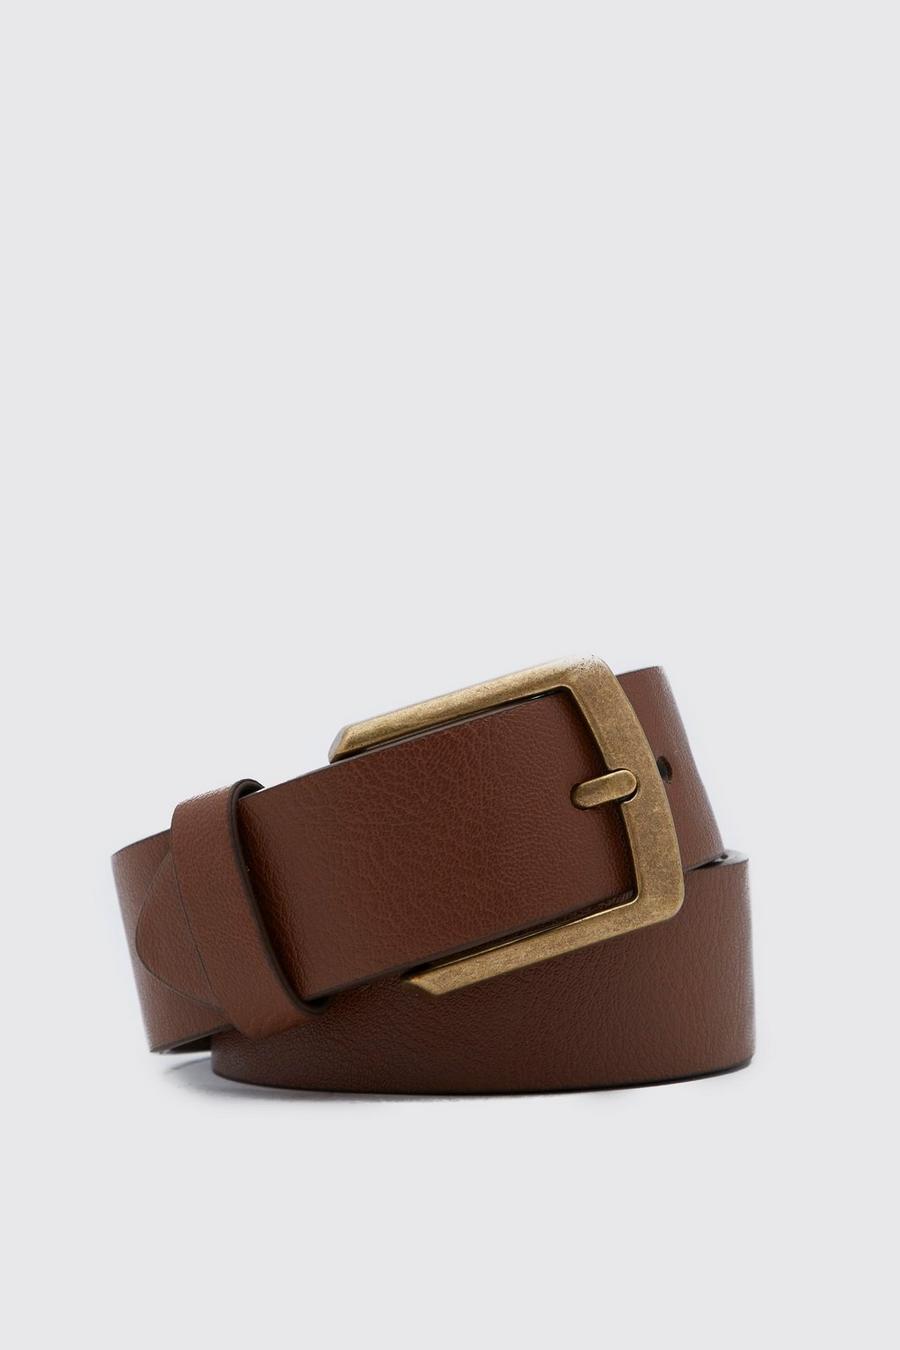 Tan Casual Faux Leather Jeans Belt image number 1